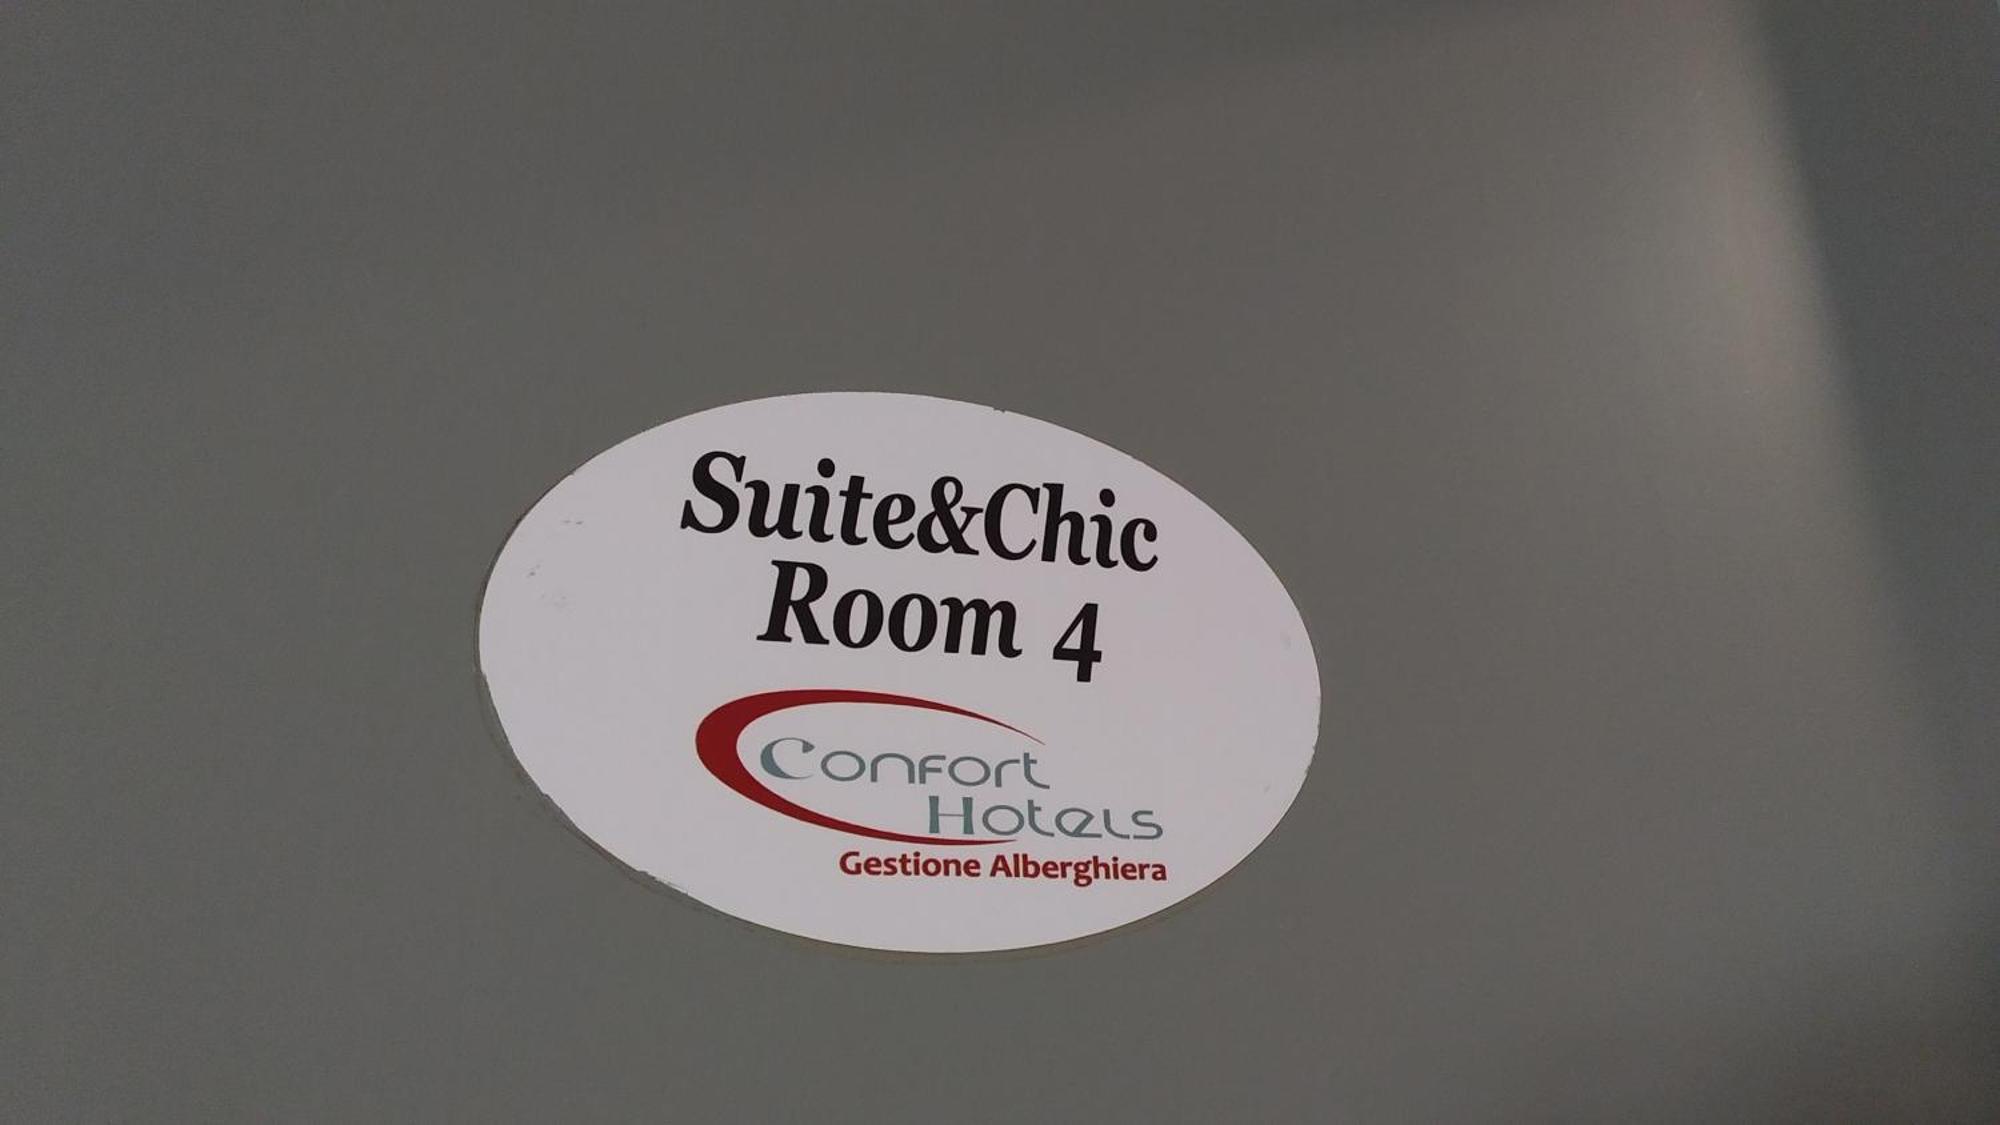 Cconforthotels R&B Suite&Chic - Self Check In 巴里 外观 照片